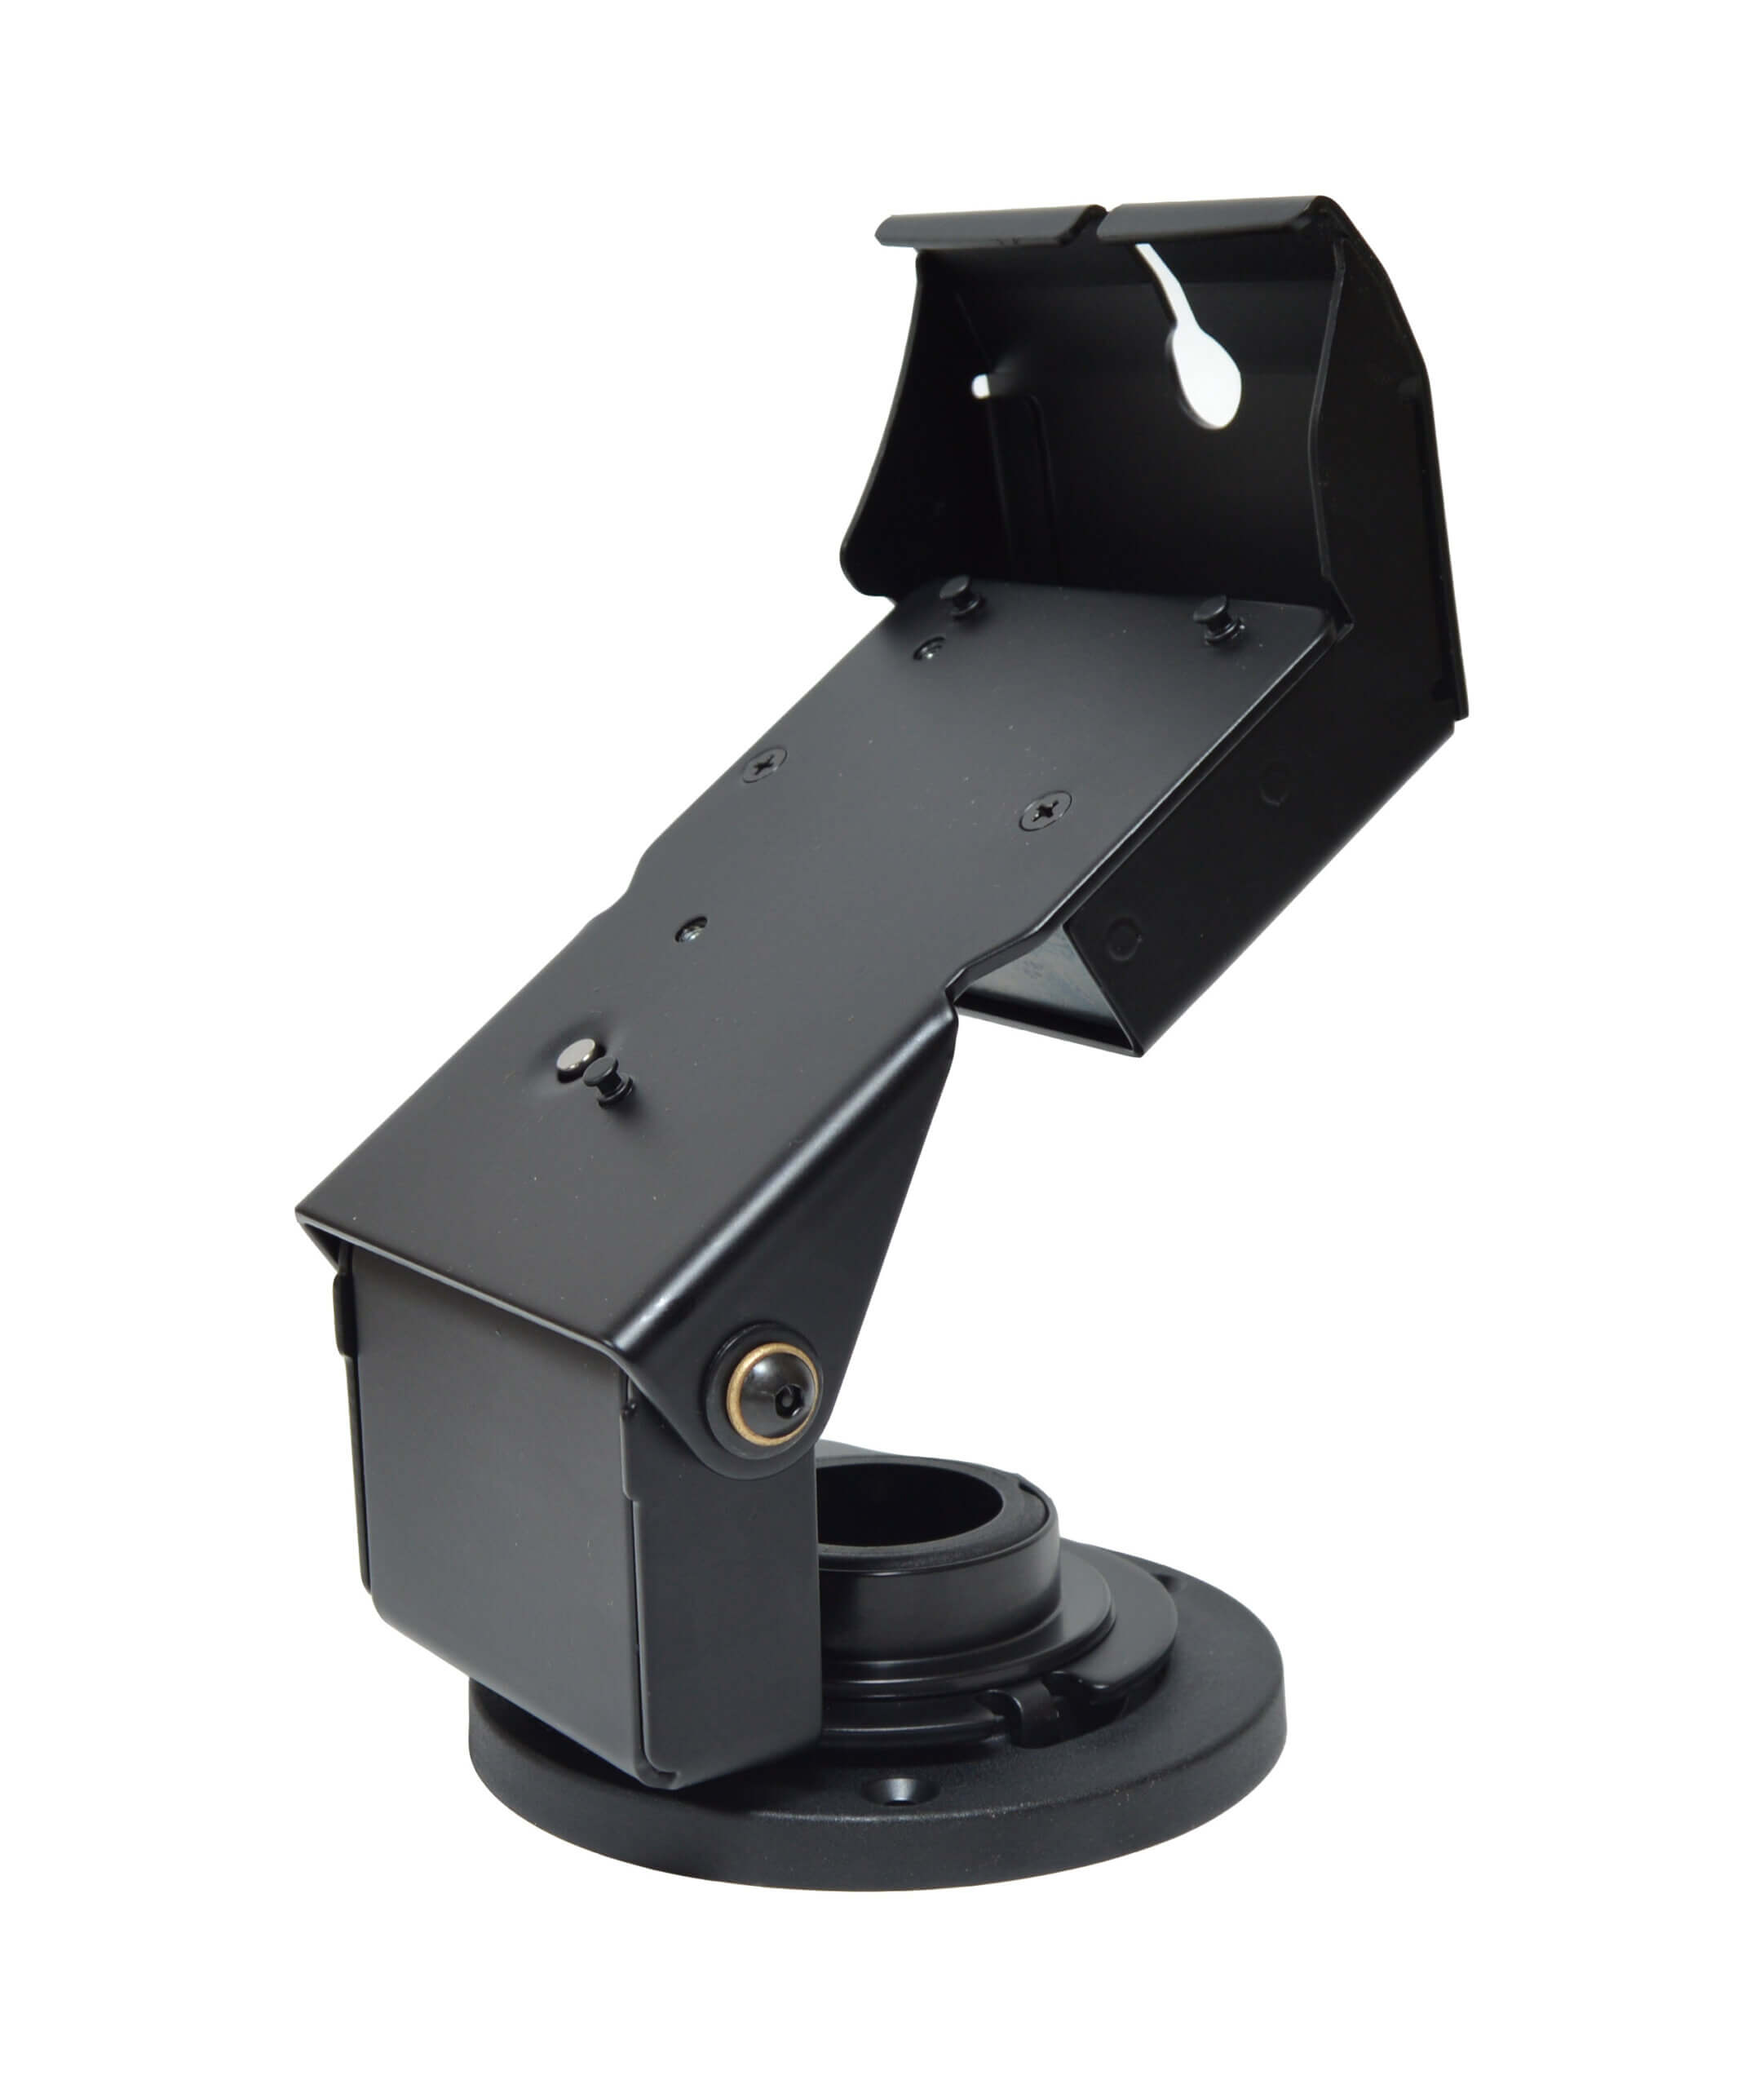 Round Base Metal Locking Stand with EMV Card Clearance for Verifone M400 Payment Terminals